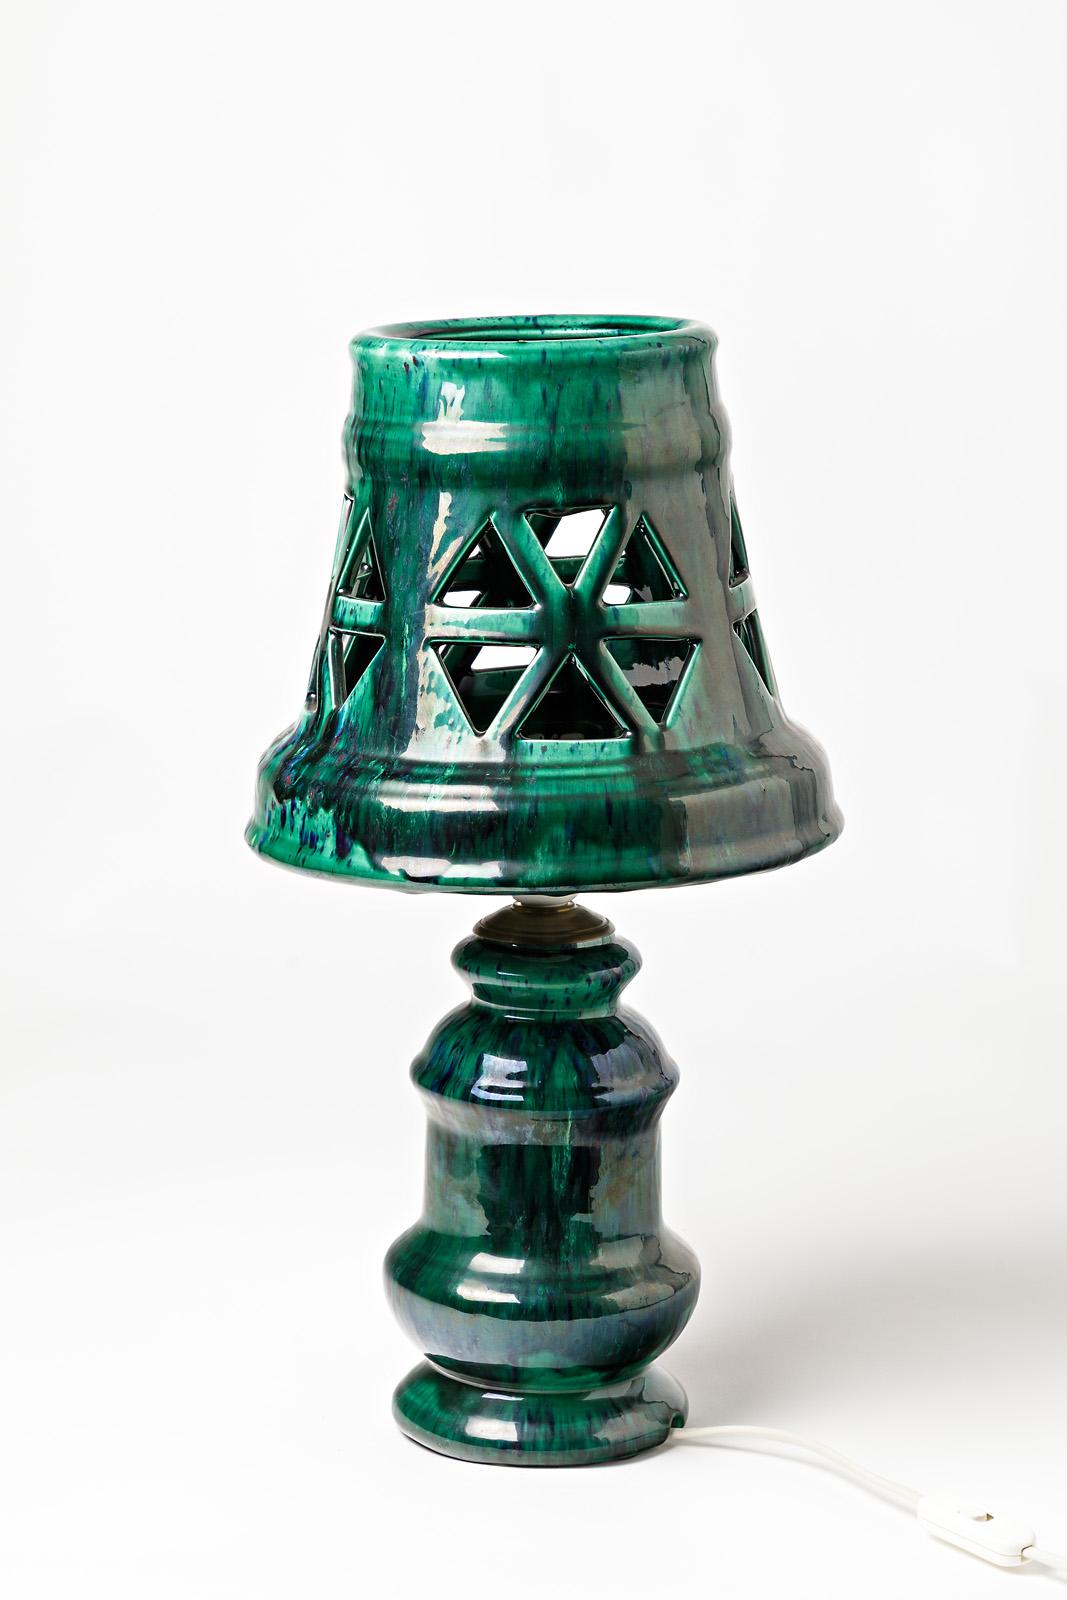 Beaux Arts Ceramic Lamp with Green Glaze Decoration, Signed Morvan, circa 1960-1970 For Sale